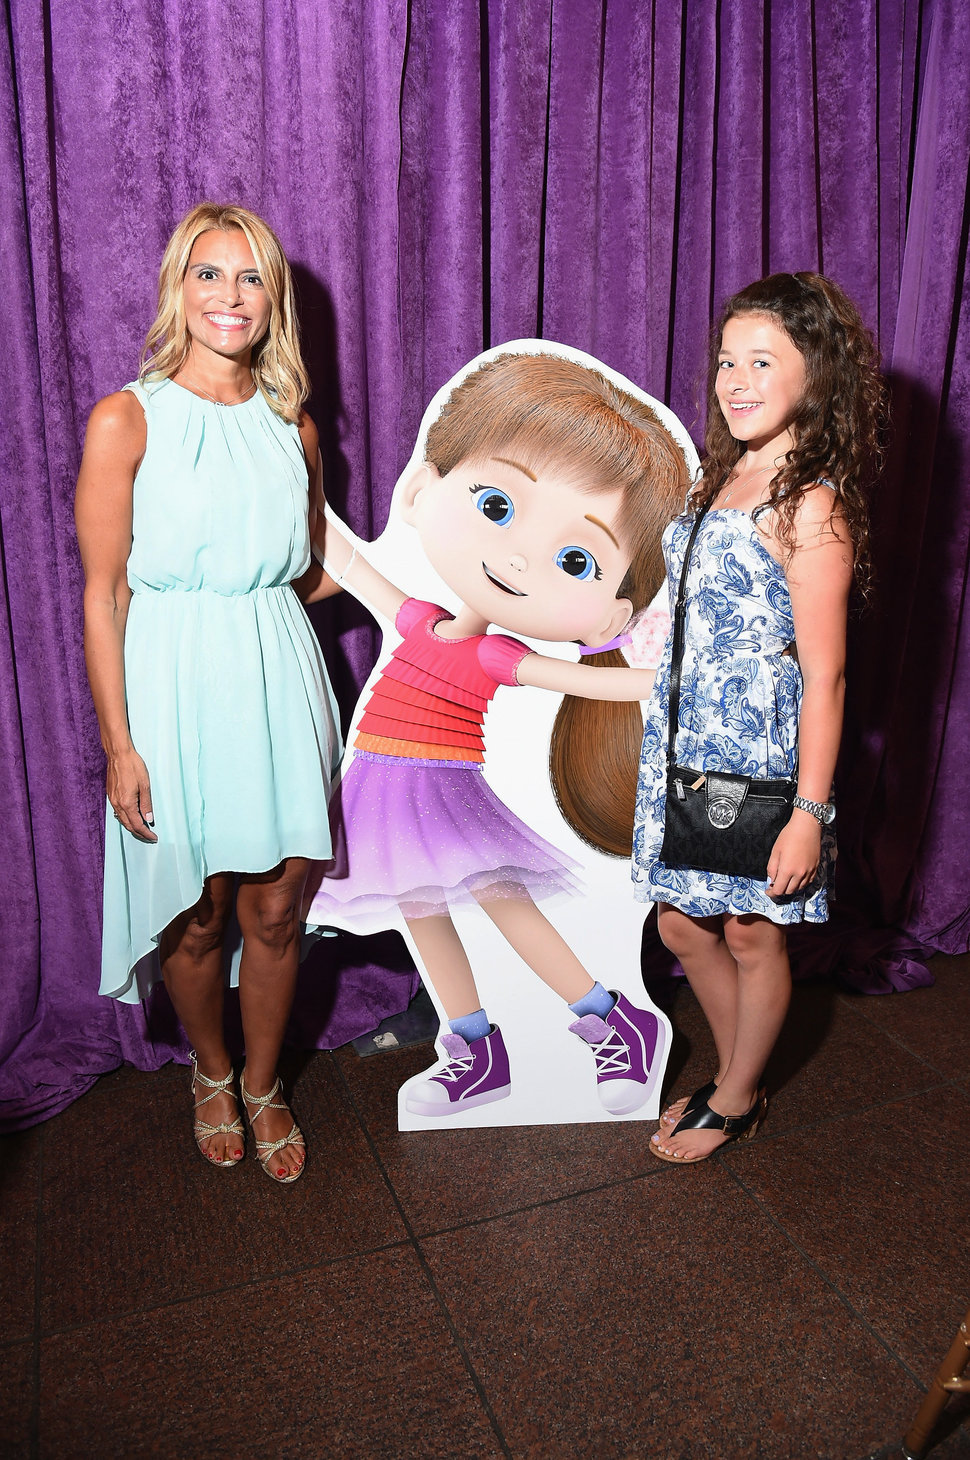 Angela Santomero (left) and actress Addison Holley attend the premiere screening event for her Amazon Original Kids Series "W